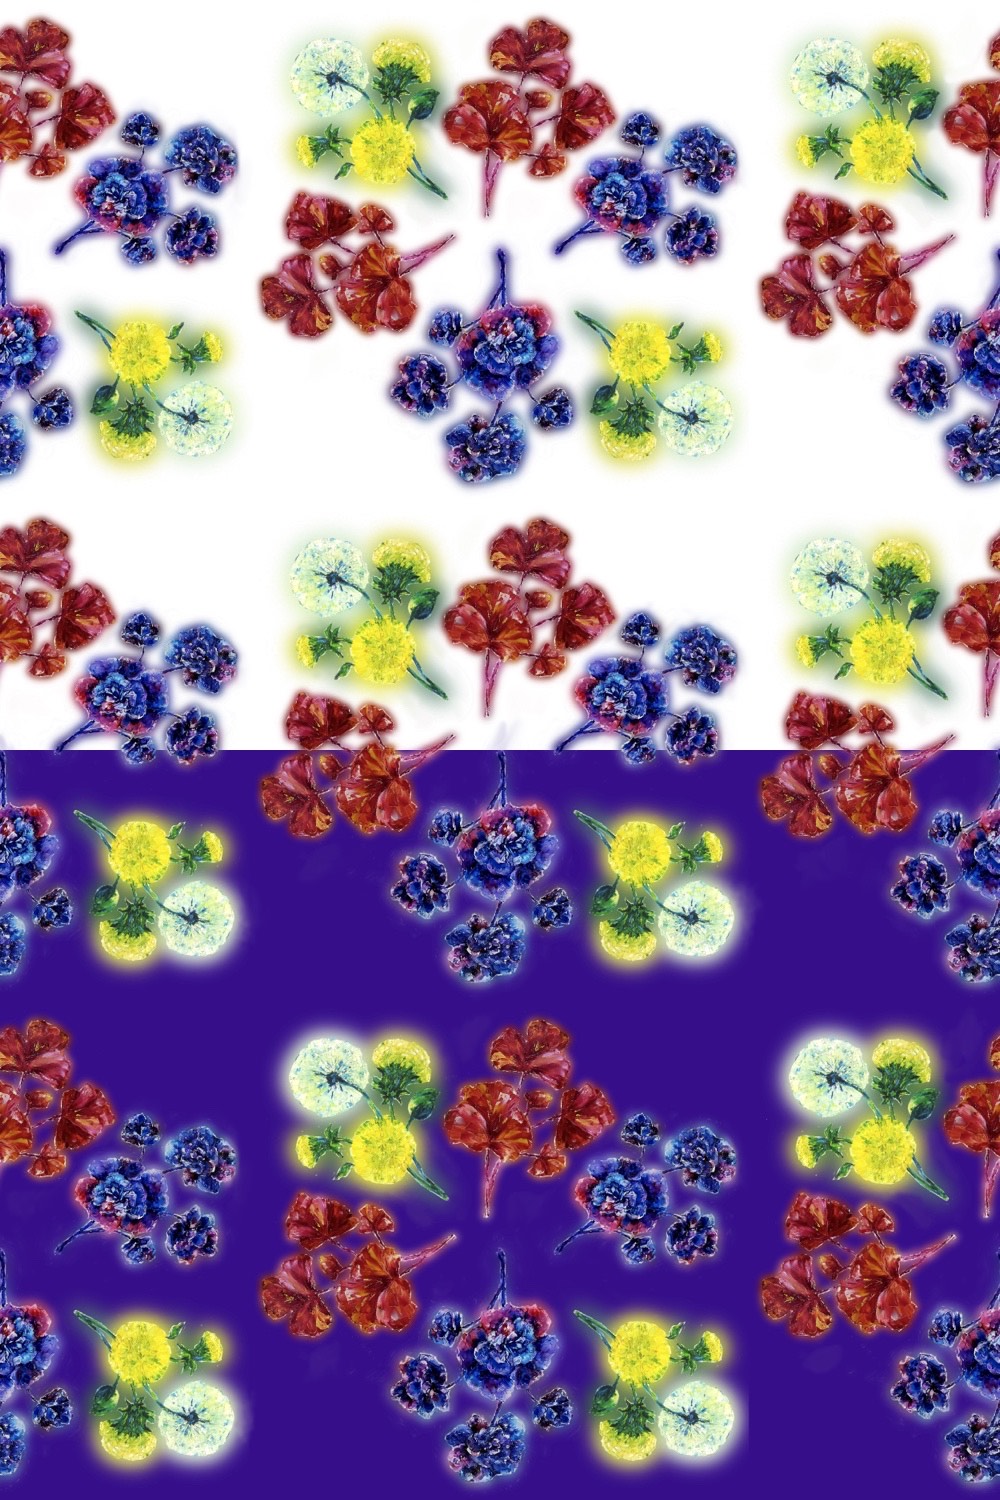 4 colorful flowers pattern pinterest preview image.